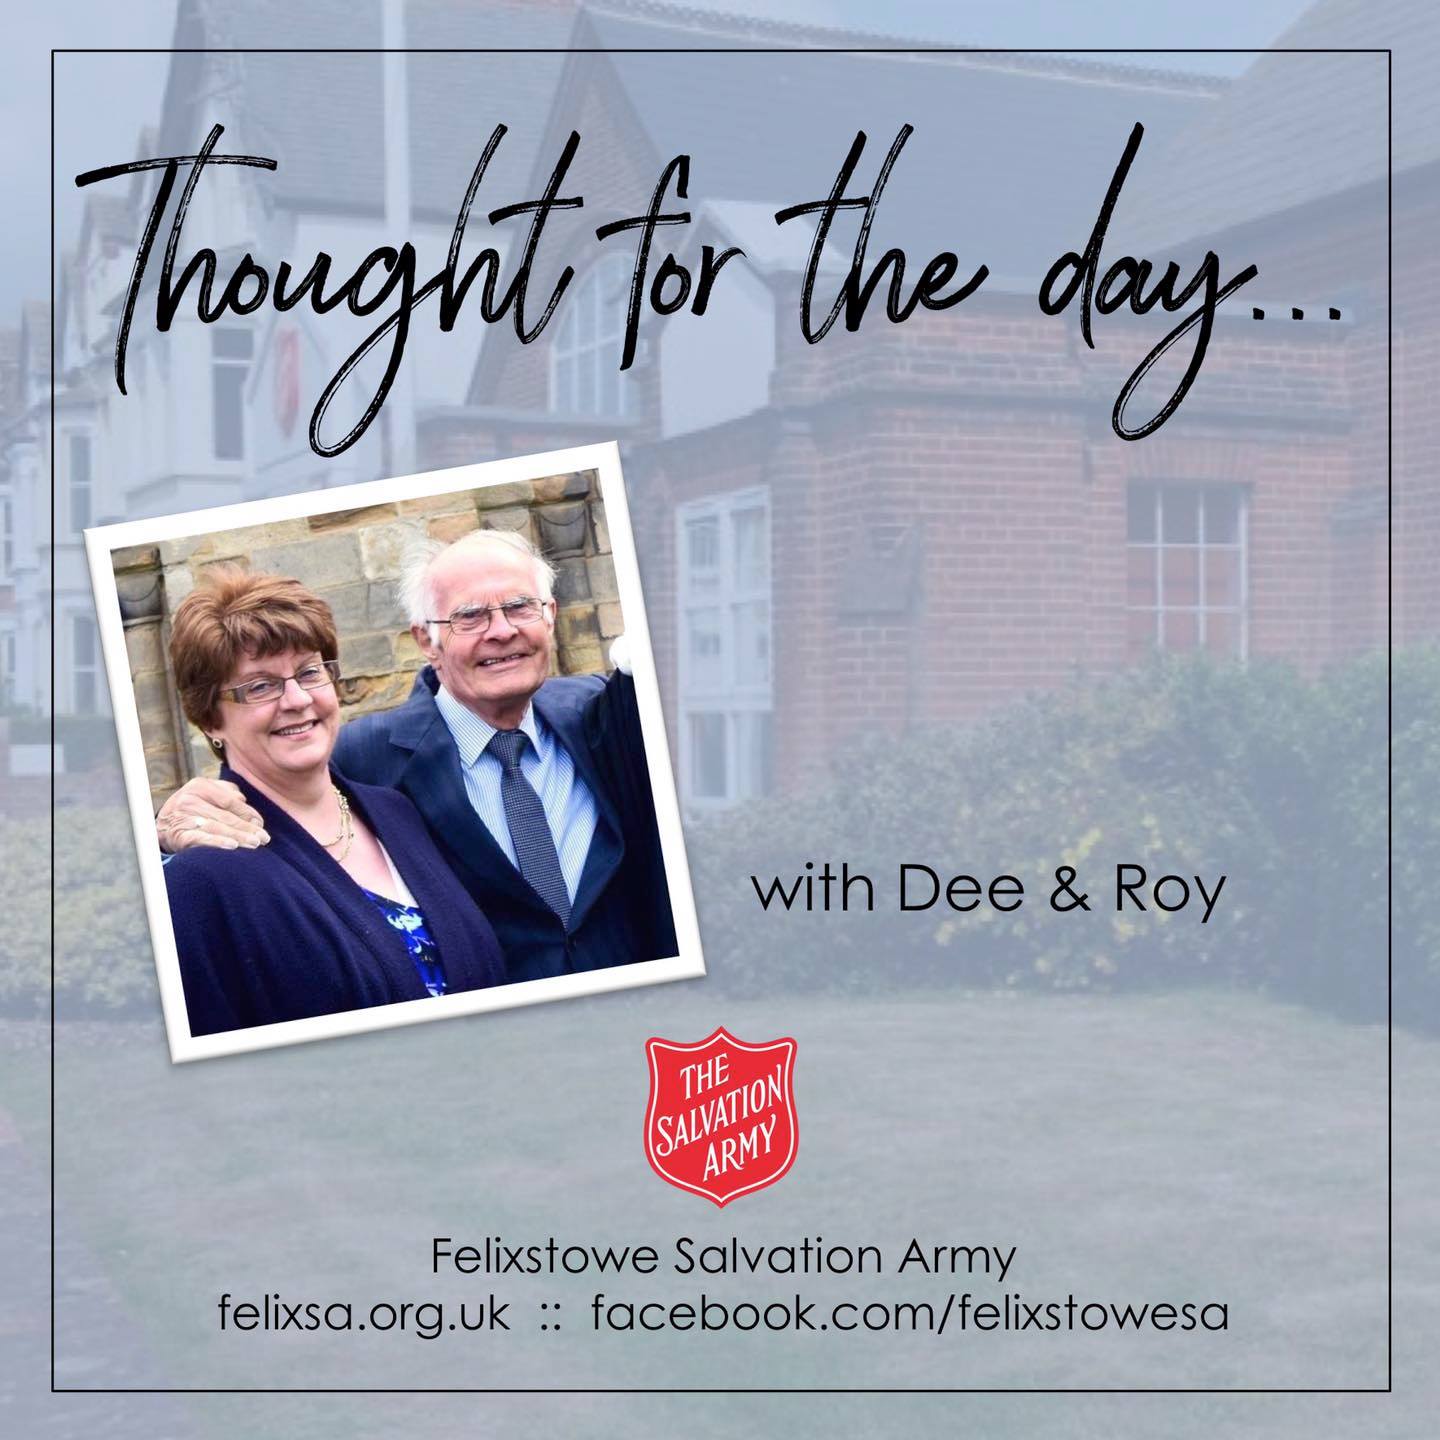 Thought for the Day – Dee & Roy’s music ‘I’m in His Hands’